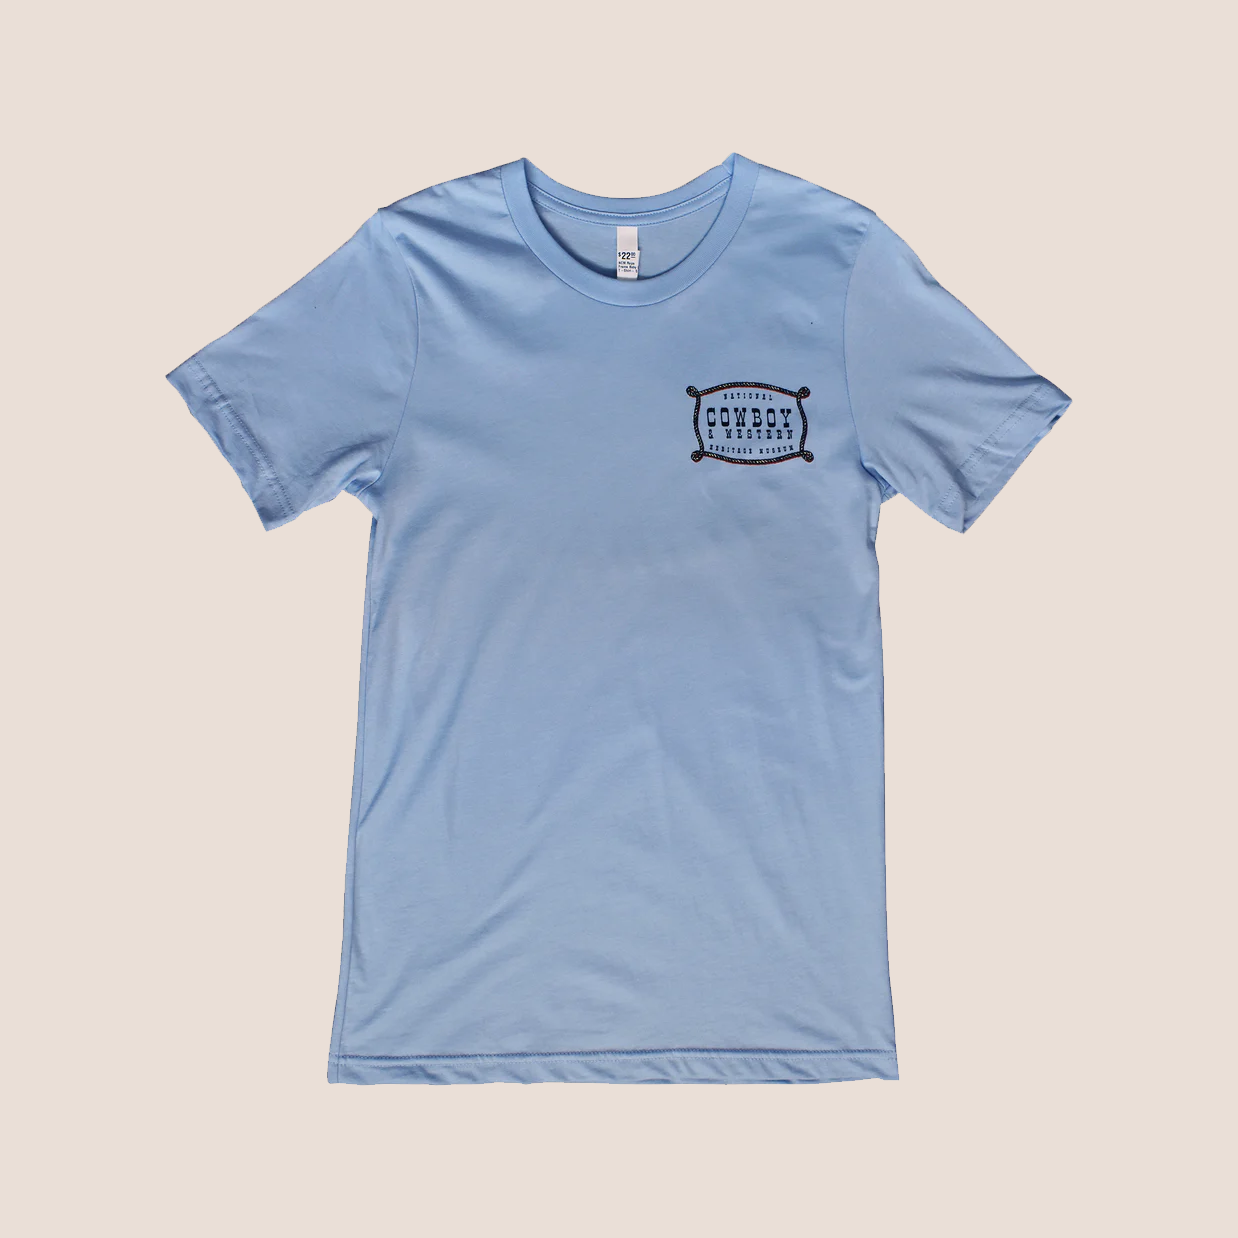 Baby Blue Rope Frame T-Shirt